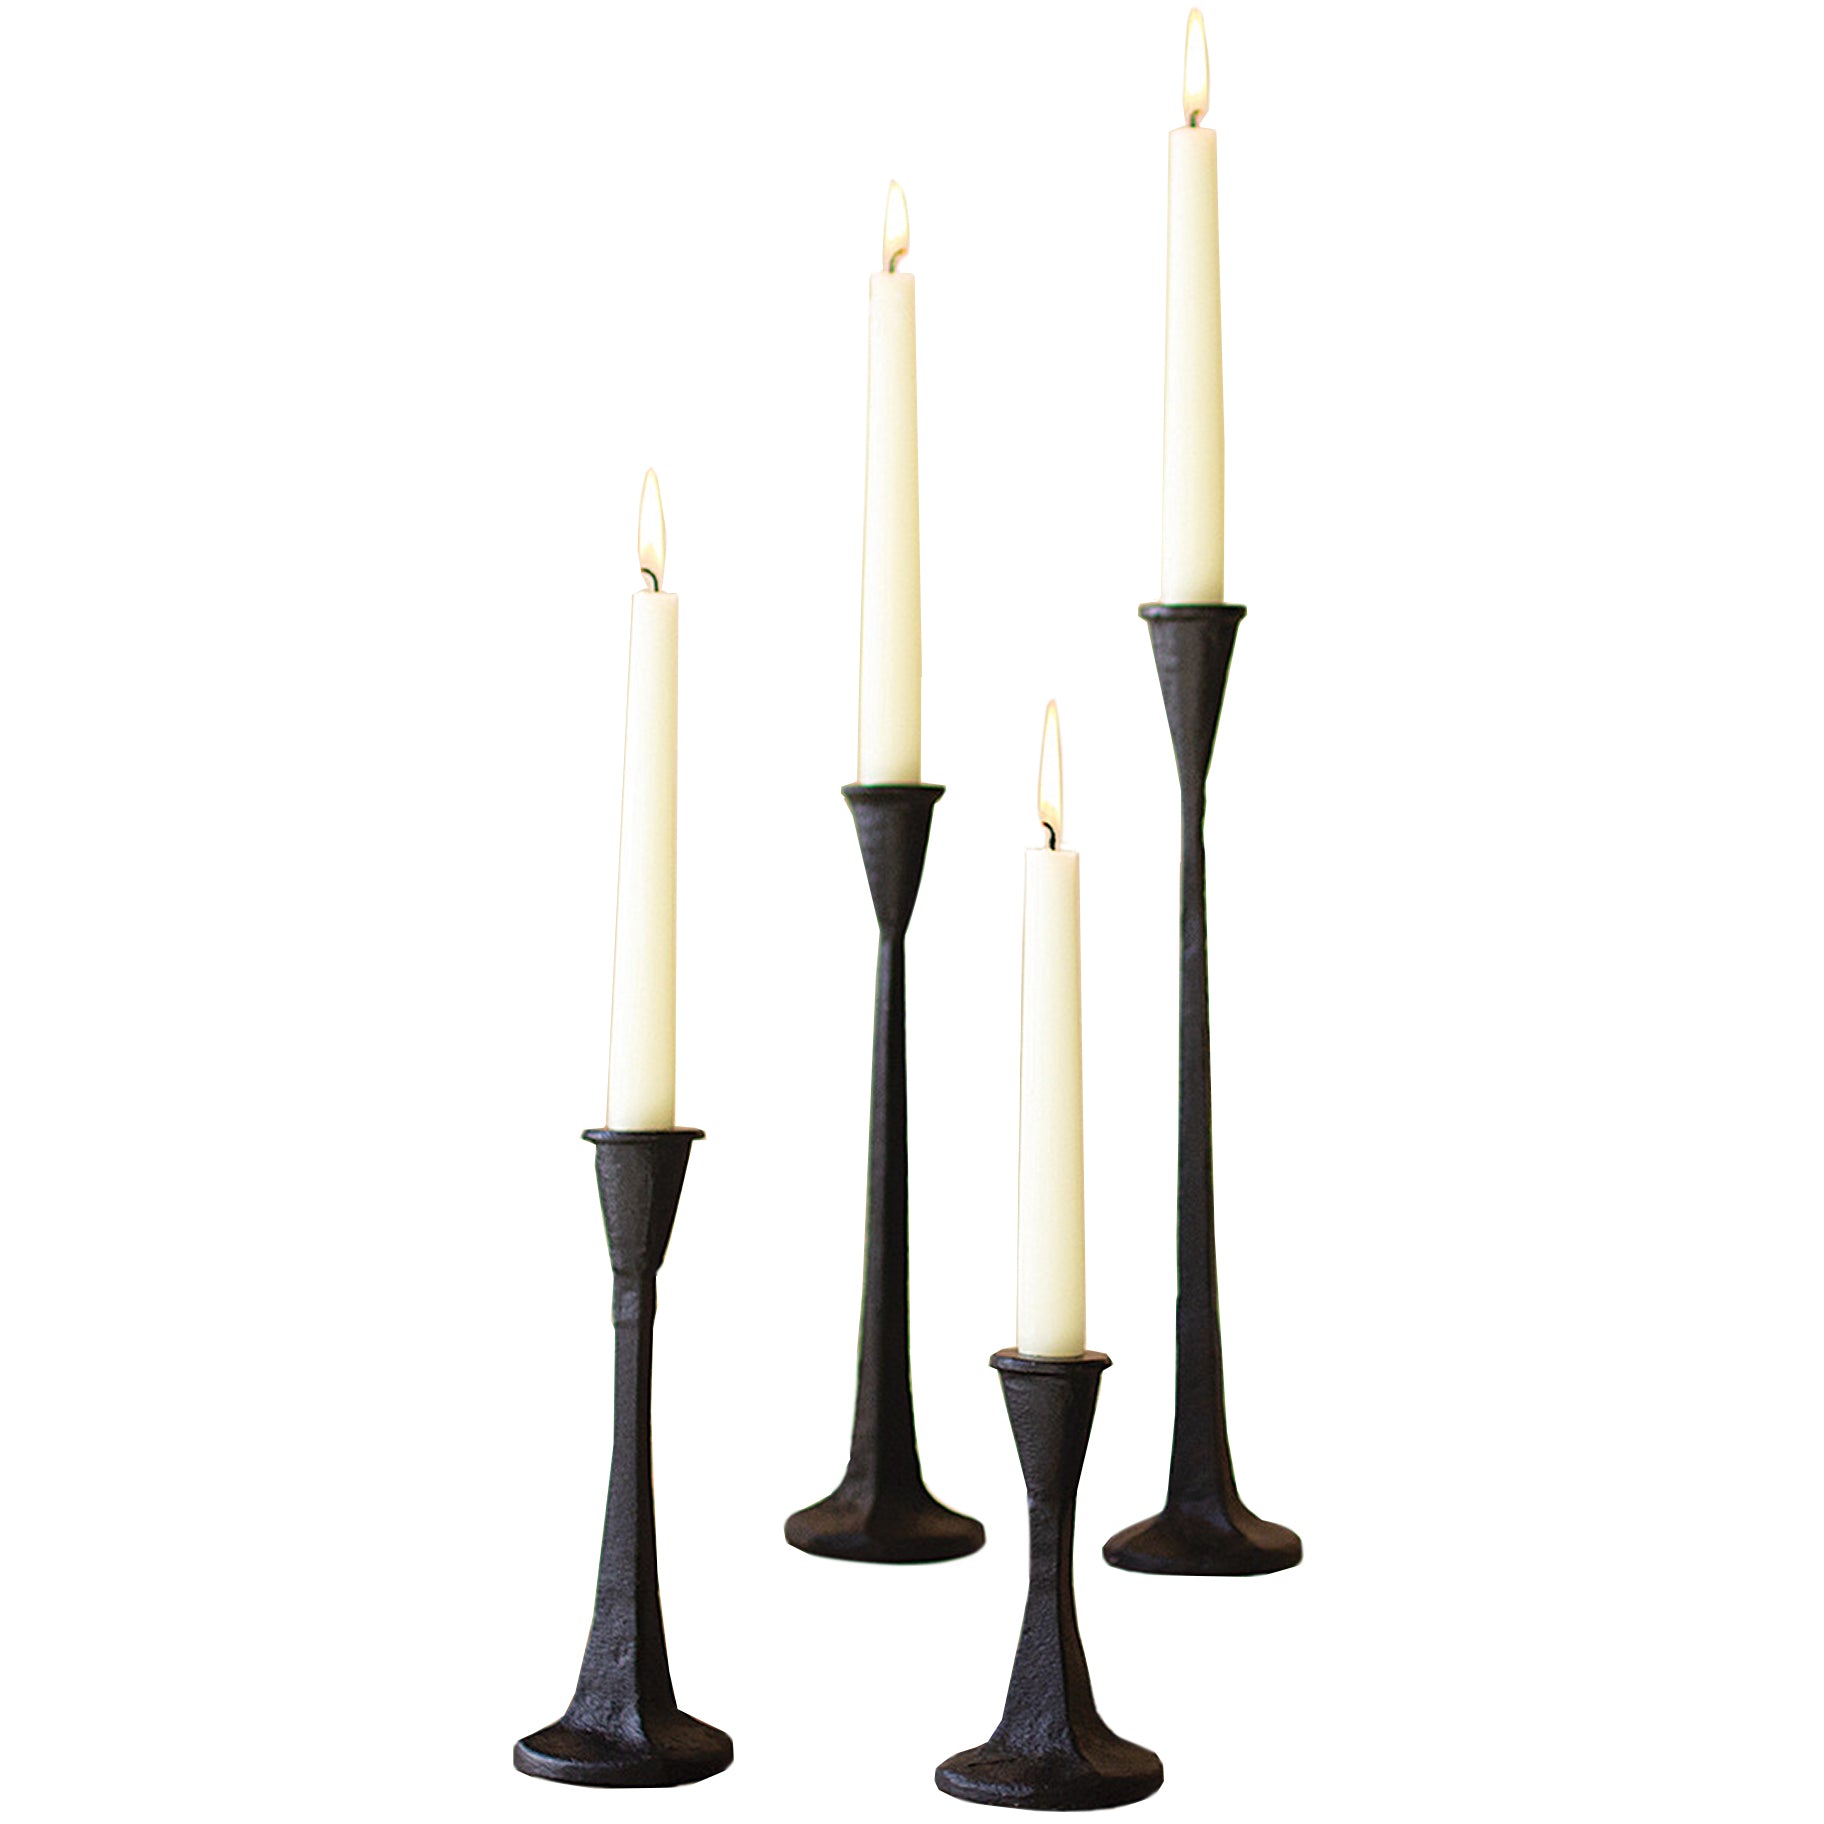 Rustic Cast Iron Taper Candle Holders - Set of 4